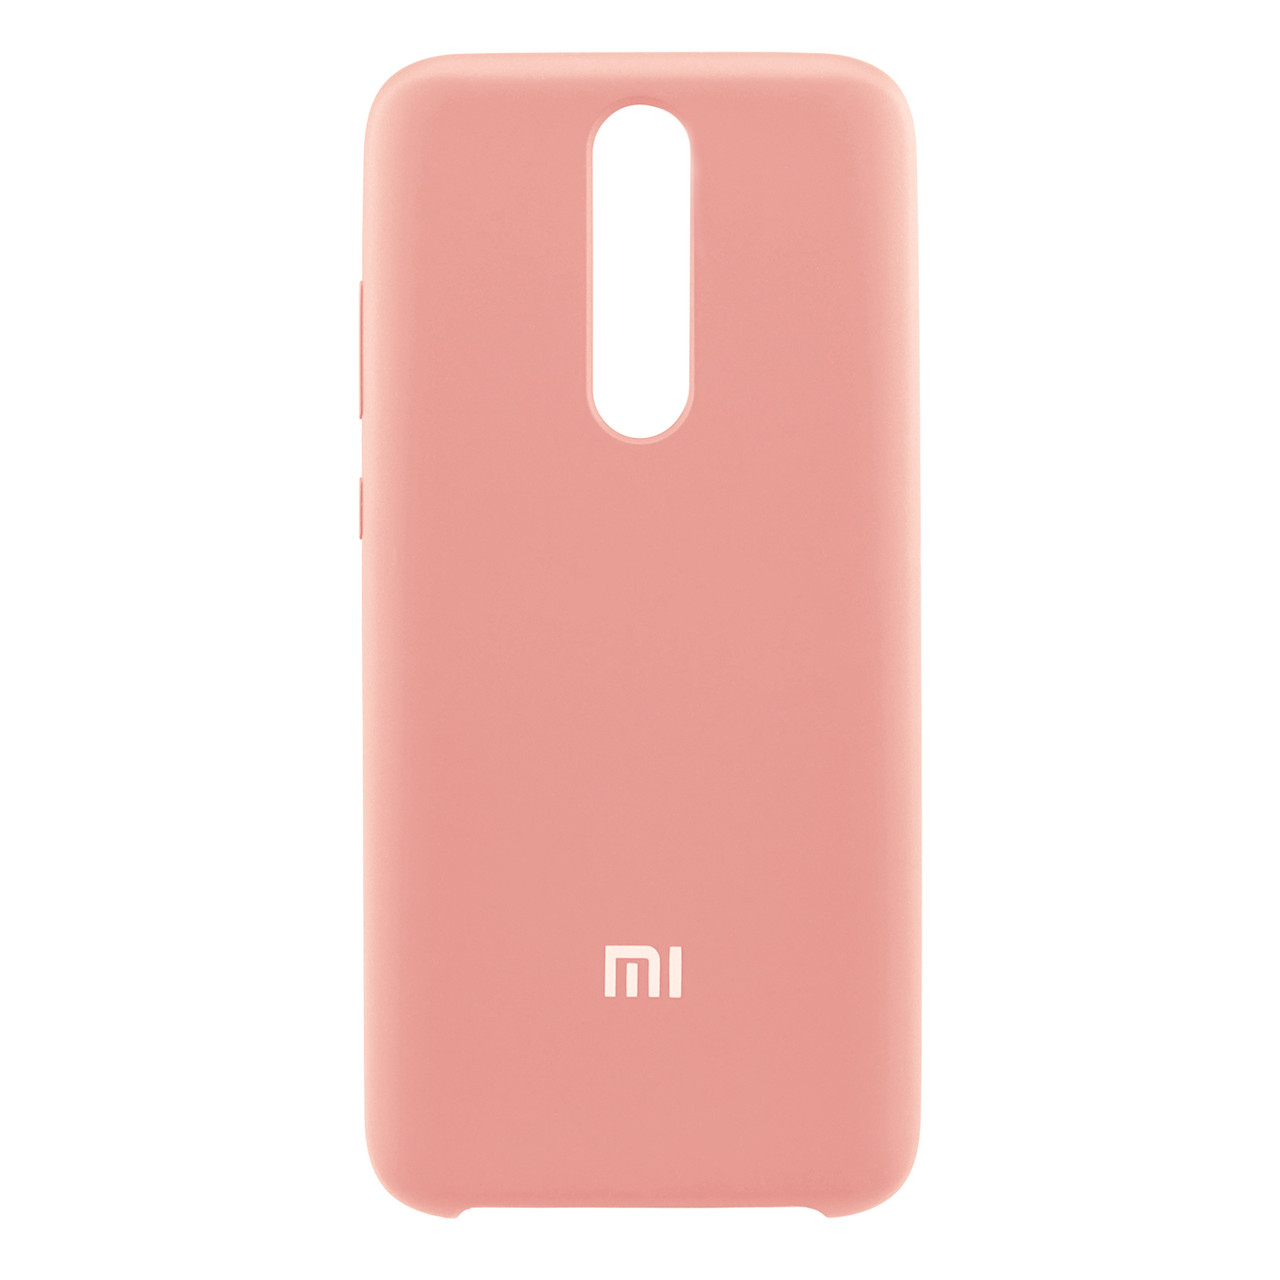 Чехол для Xiaomi Redmi 8 back cover Silky and soft-touch Silicone Cover, Pink - фото 1 - id-p115047145